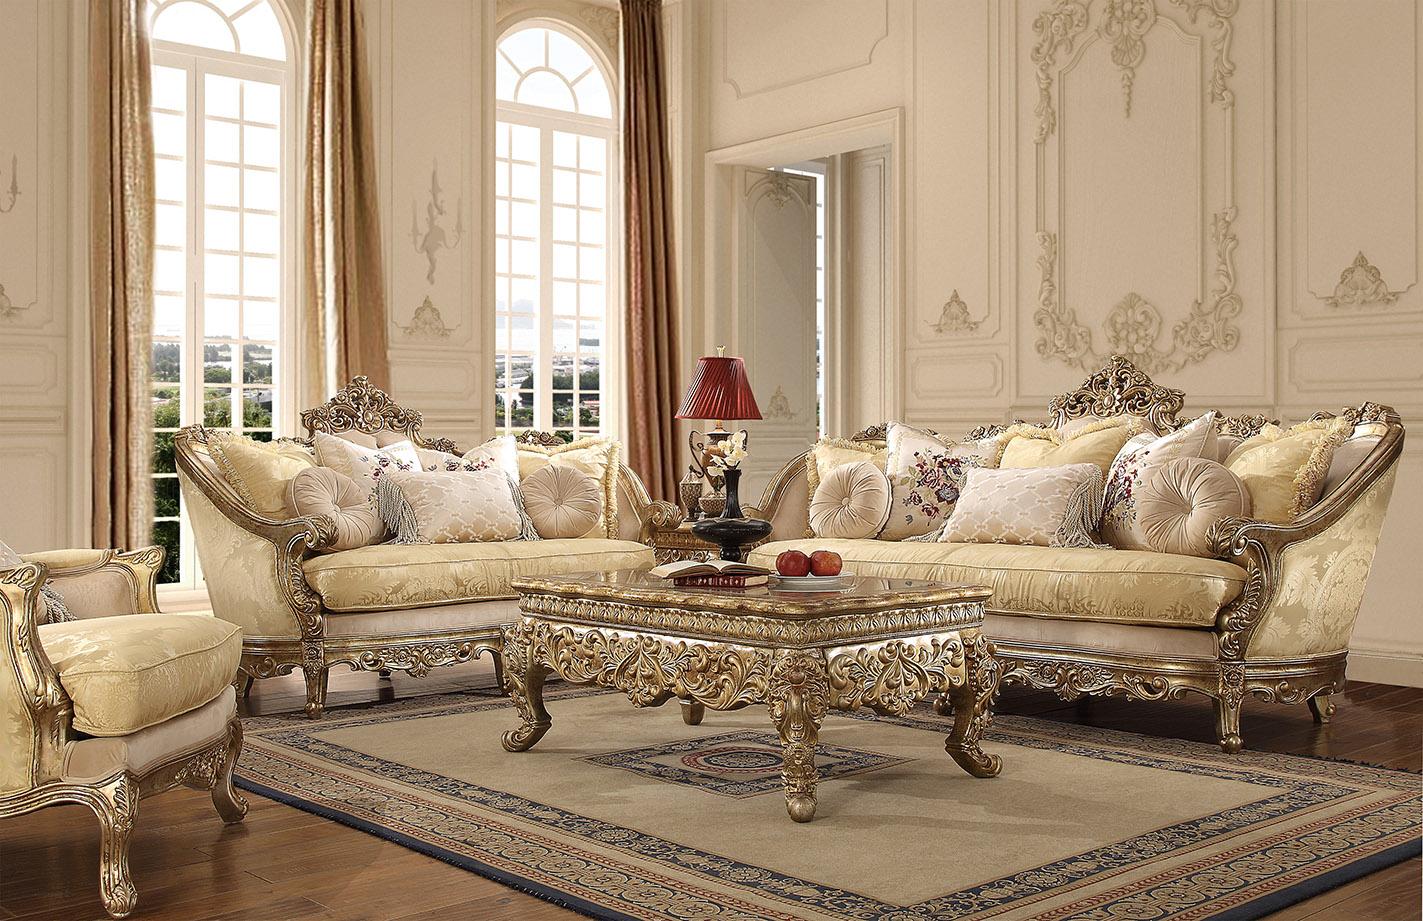 Traditional Sofa Set HD-2626 – 2PC SOFA SET HD-2626-2PC in Gold, Champagne Leatherette